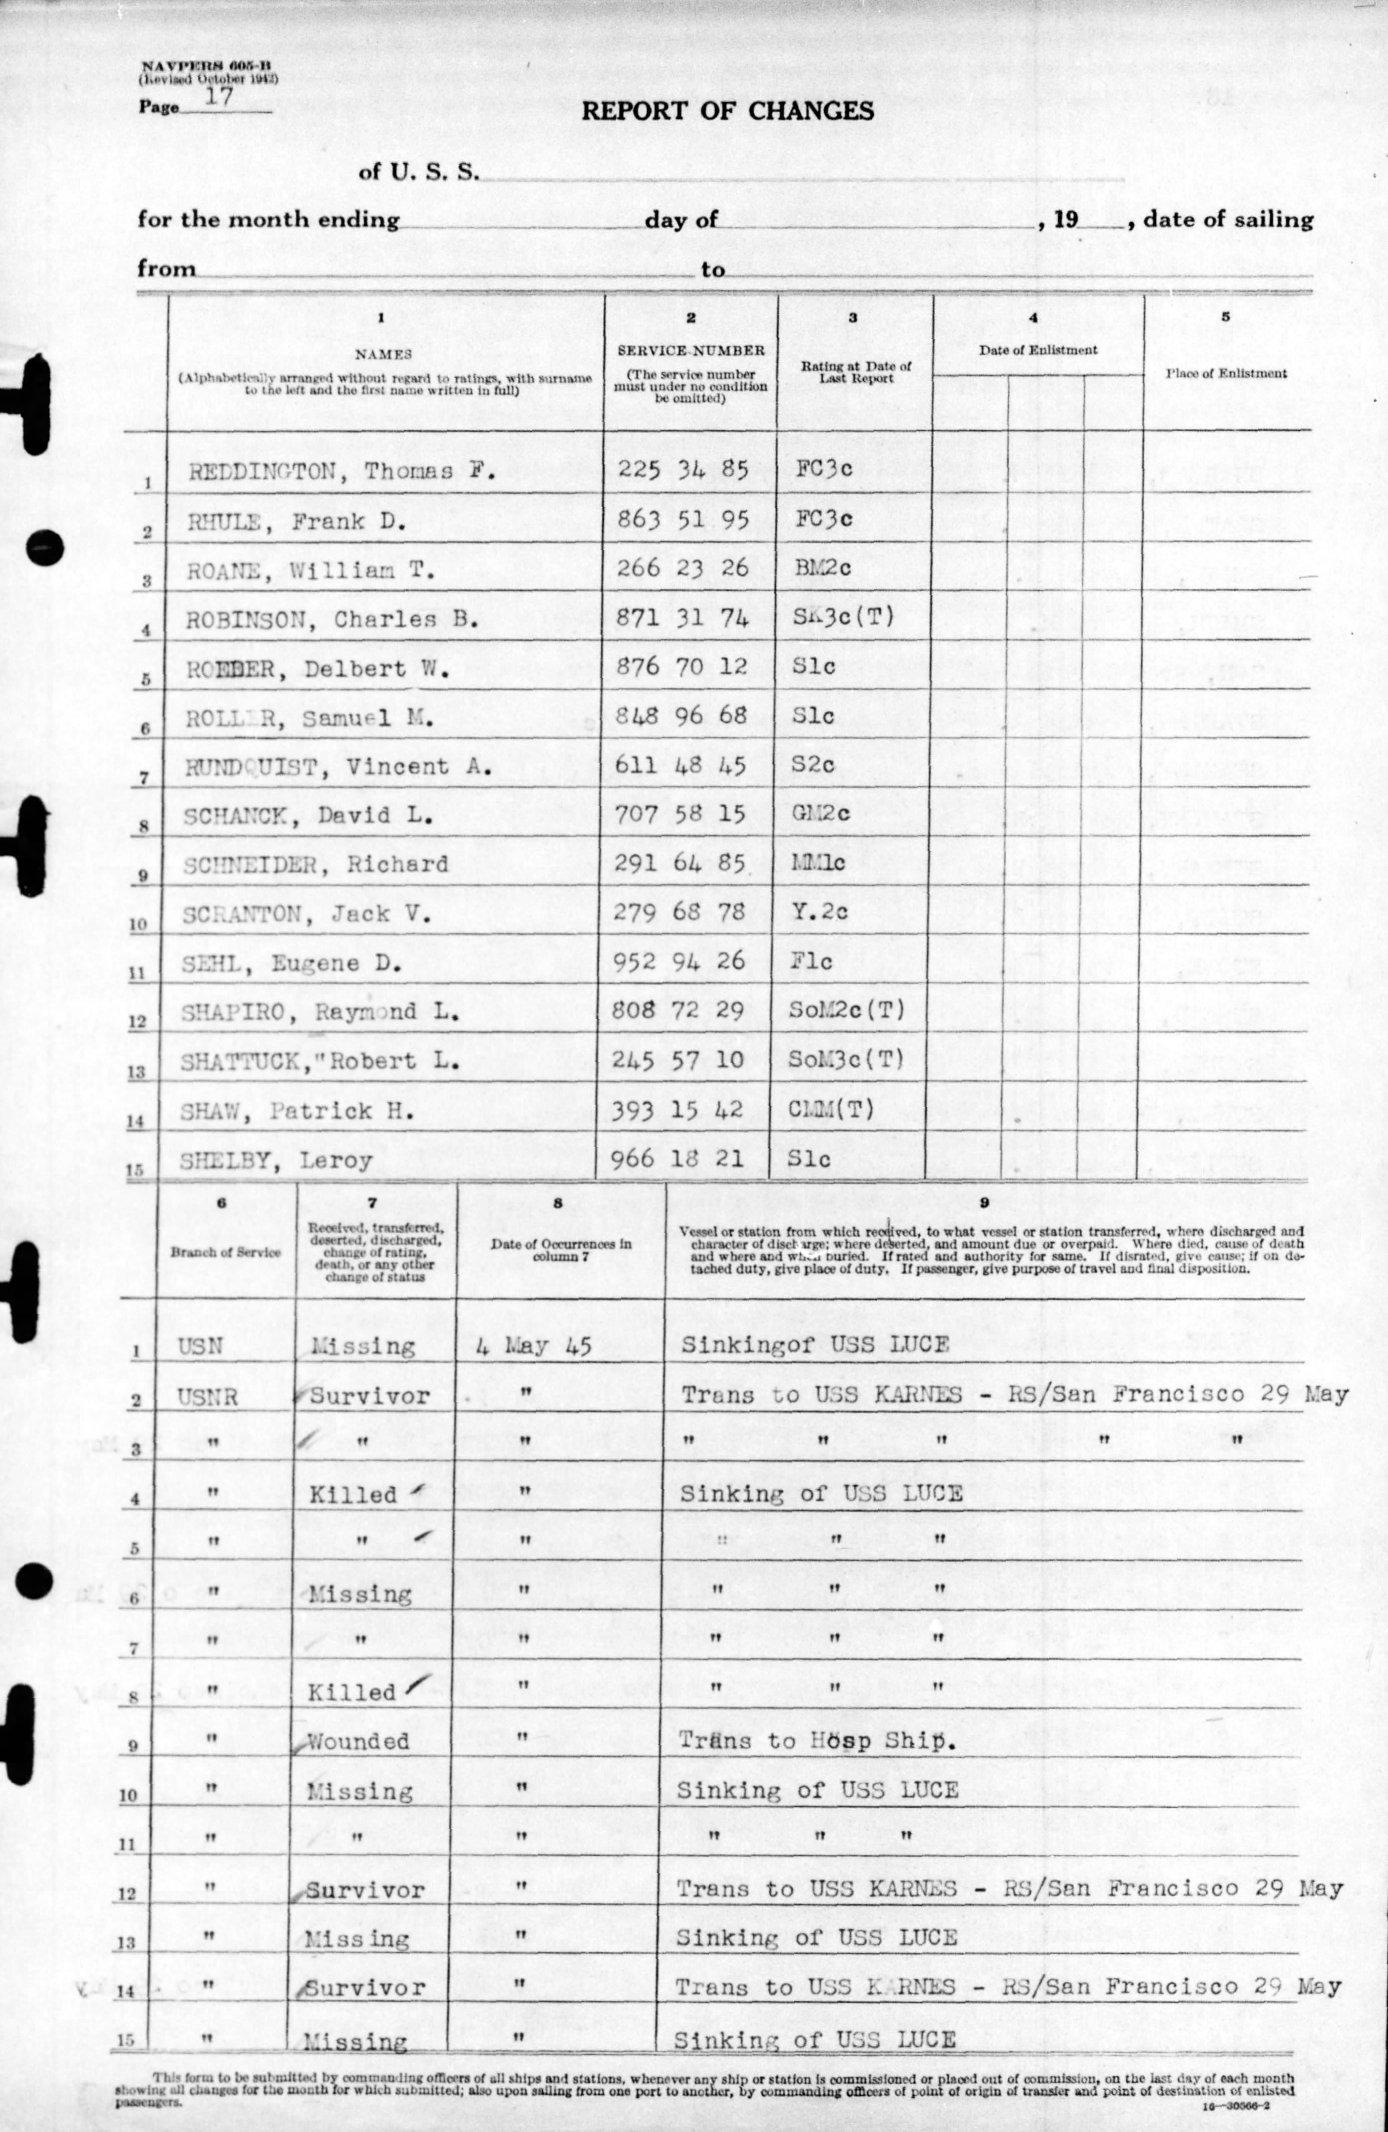 USS Luce final muster list dated June 19, 1945 after the ship was sunk May 4, 1945. Page 19 of 25.